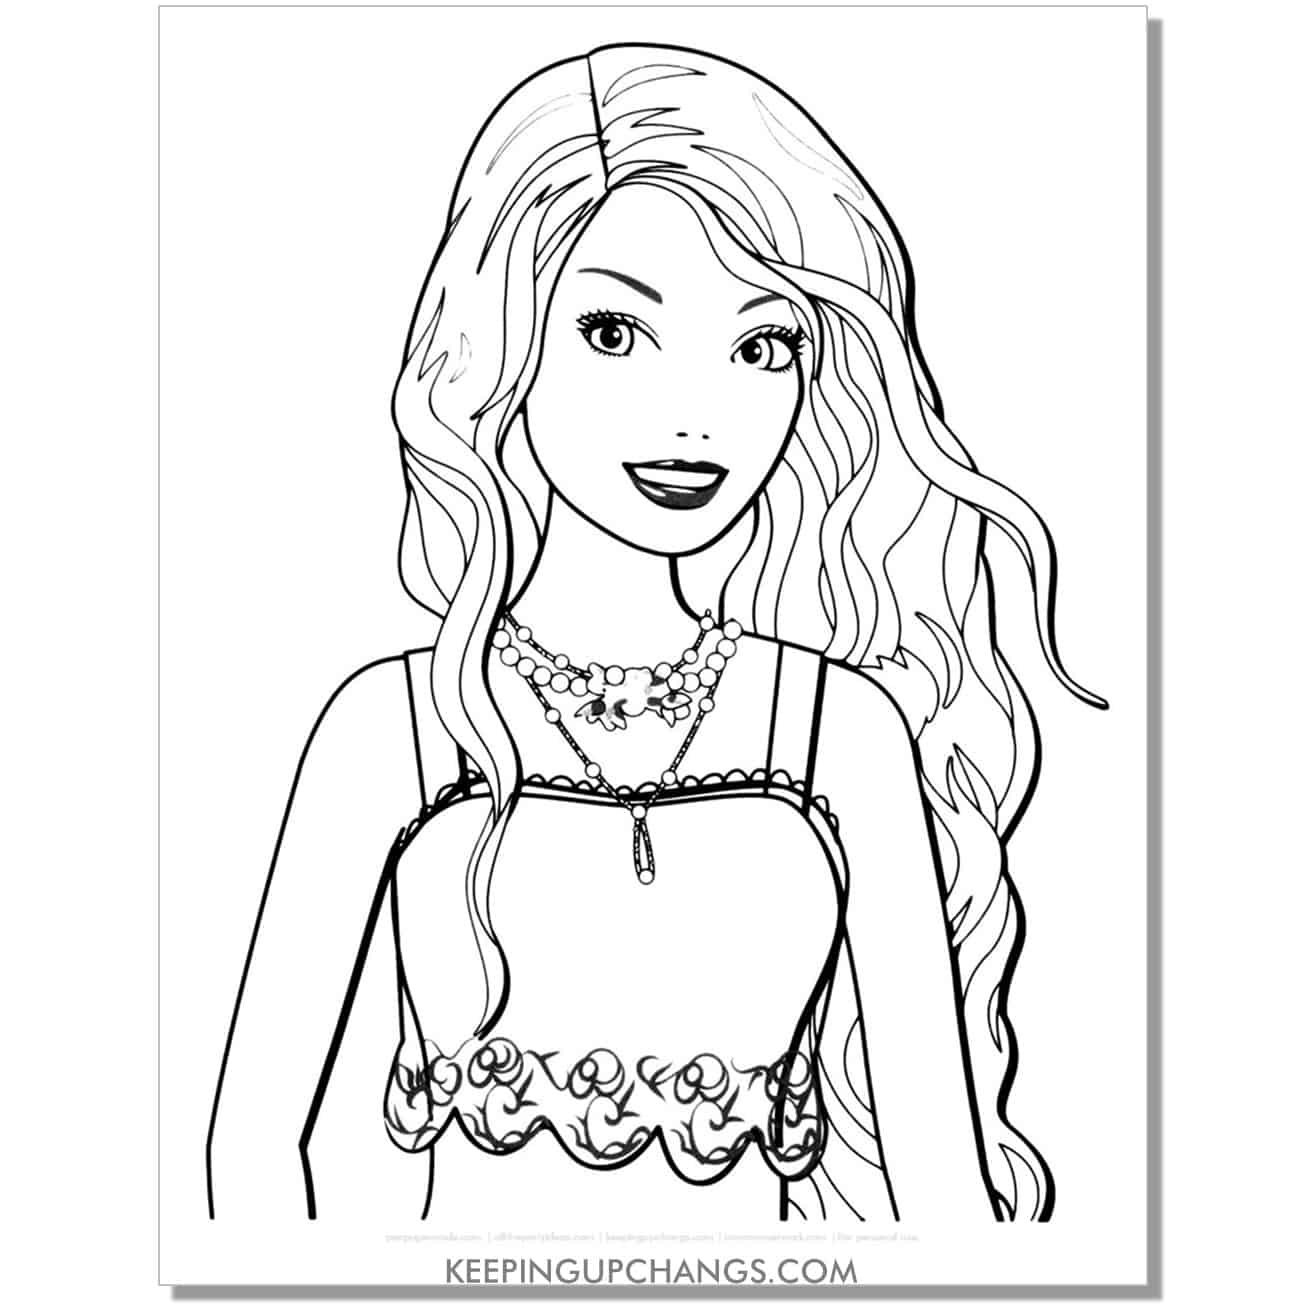 taylor swift barbie coloring page.